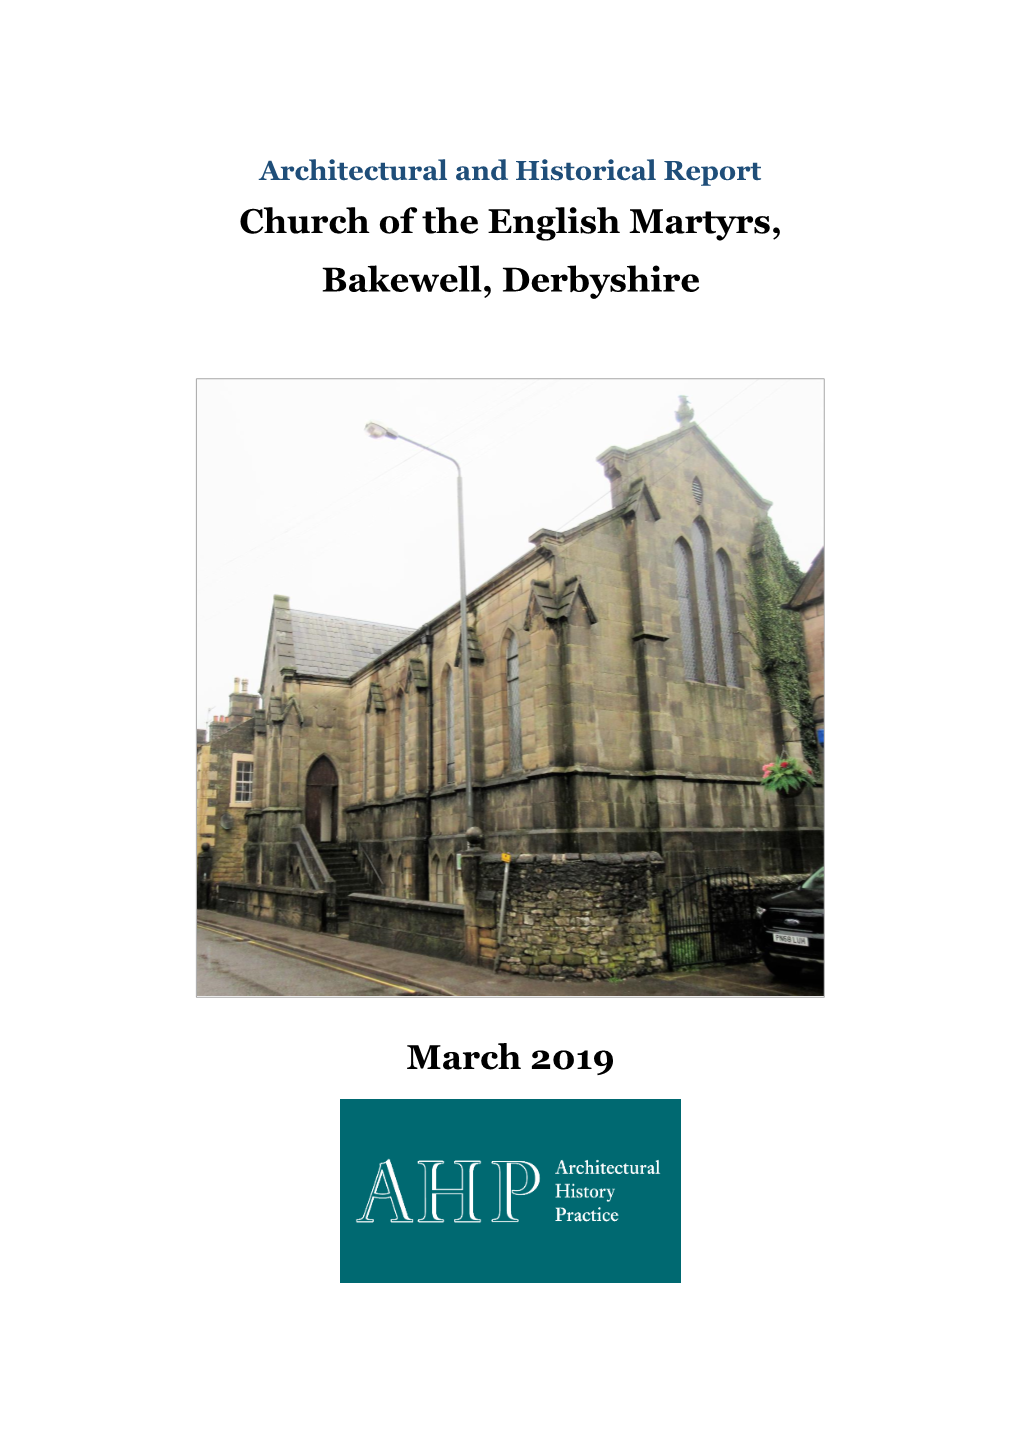 Church of the English Martyrs, Bakewell, Derbyshire March 2019